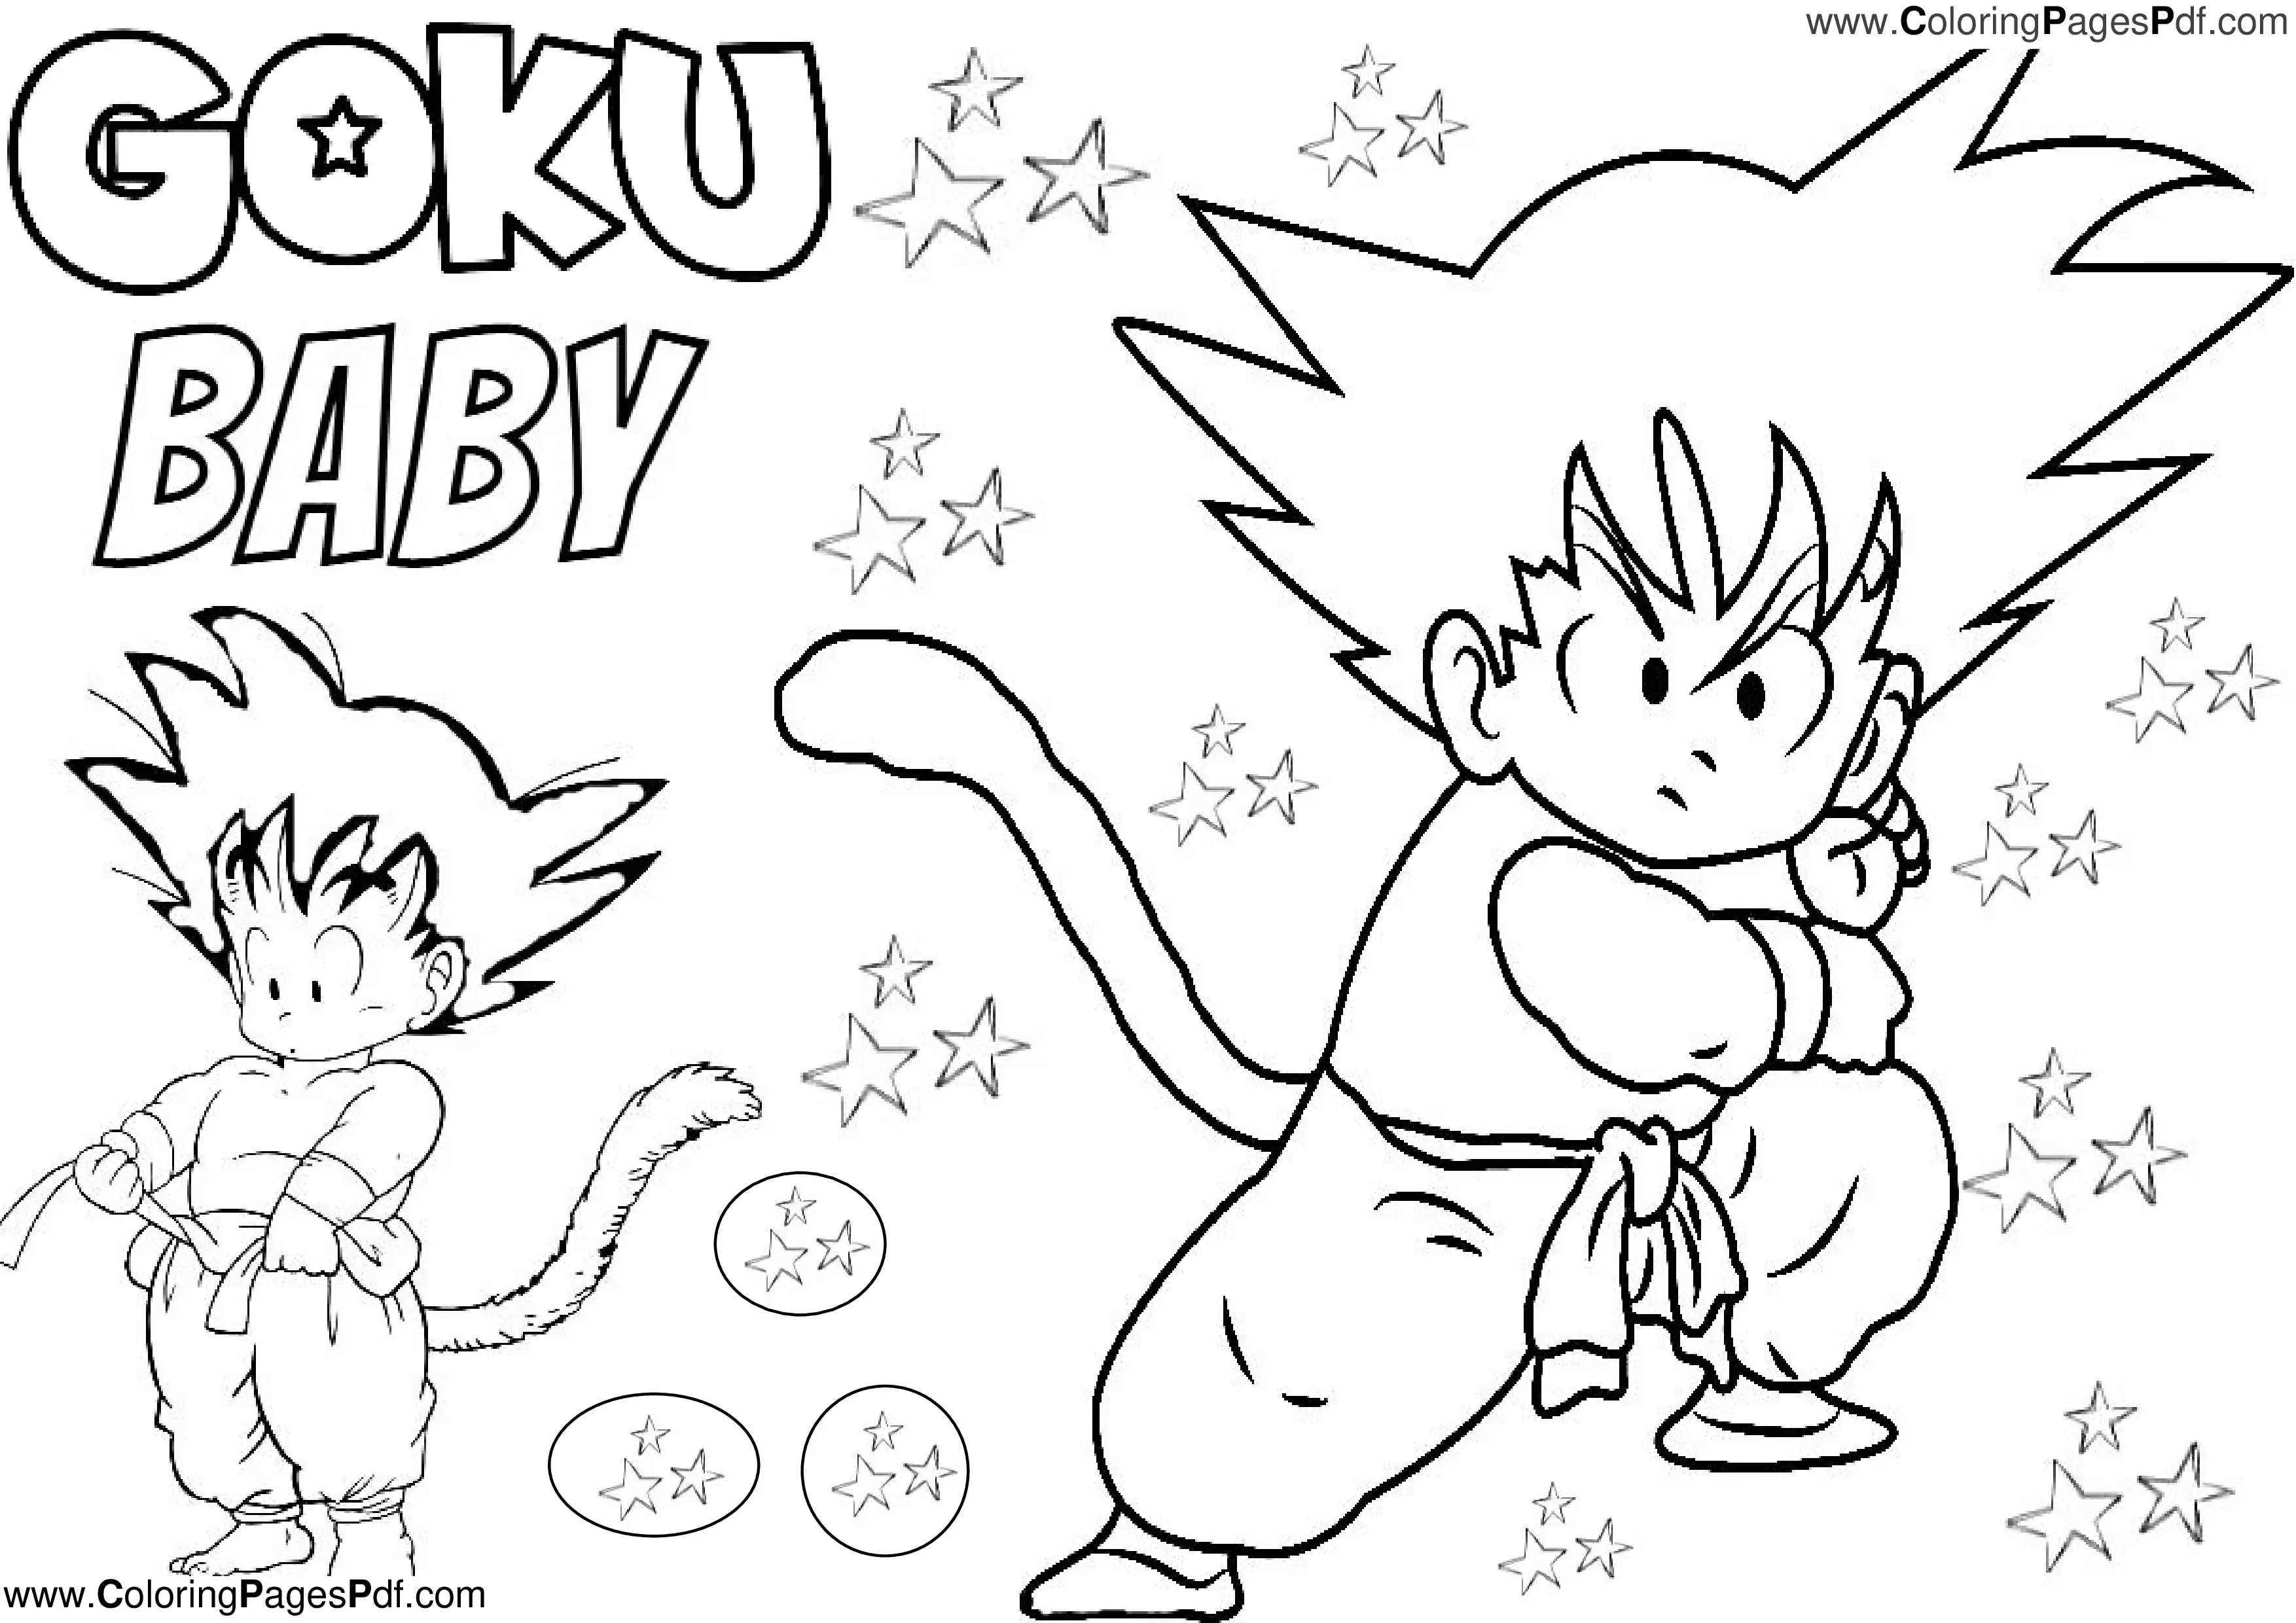 Baby goku coloring pages